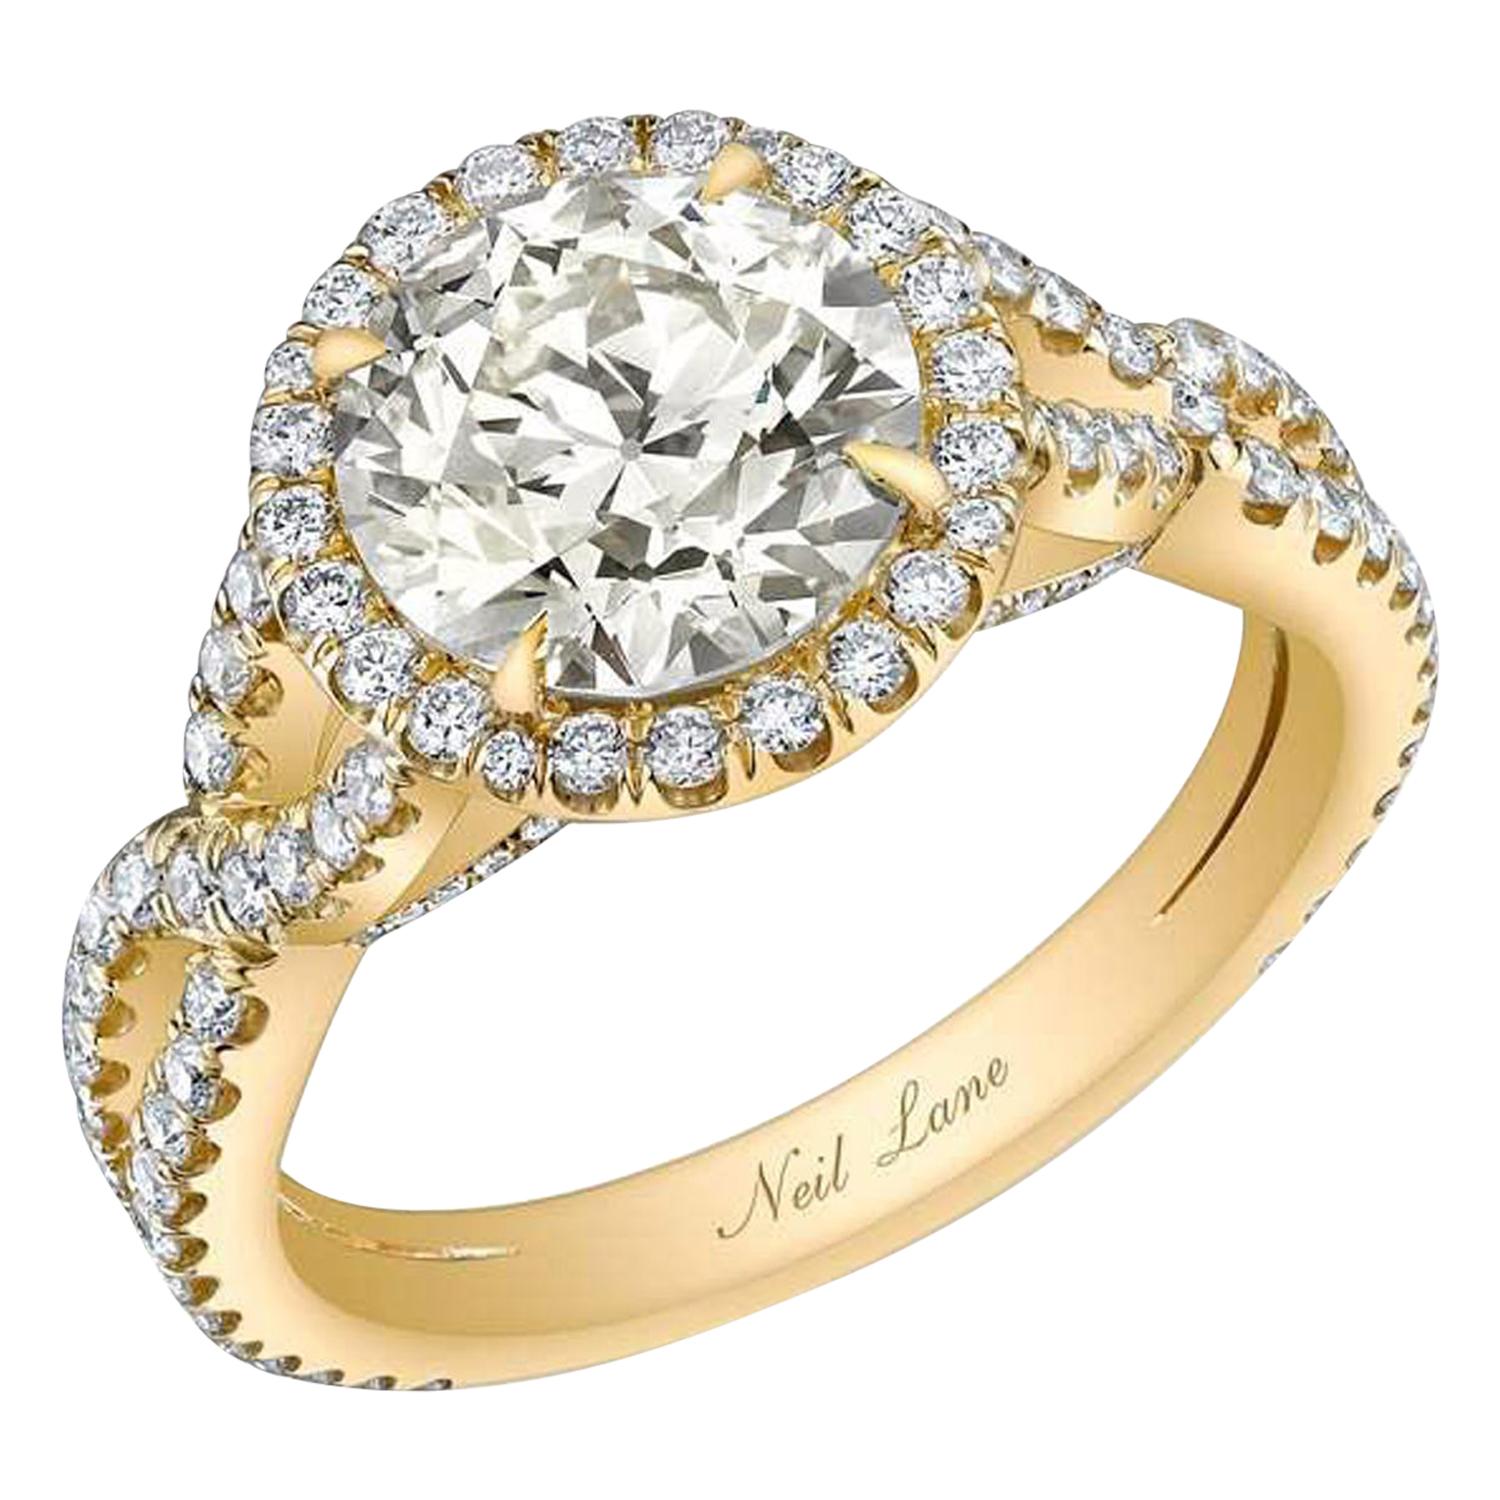 Neil Lane Couture Design Old European-Cut Diamond, 18K Yellow Gold Ring For Sale